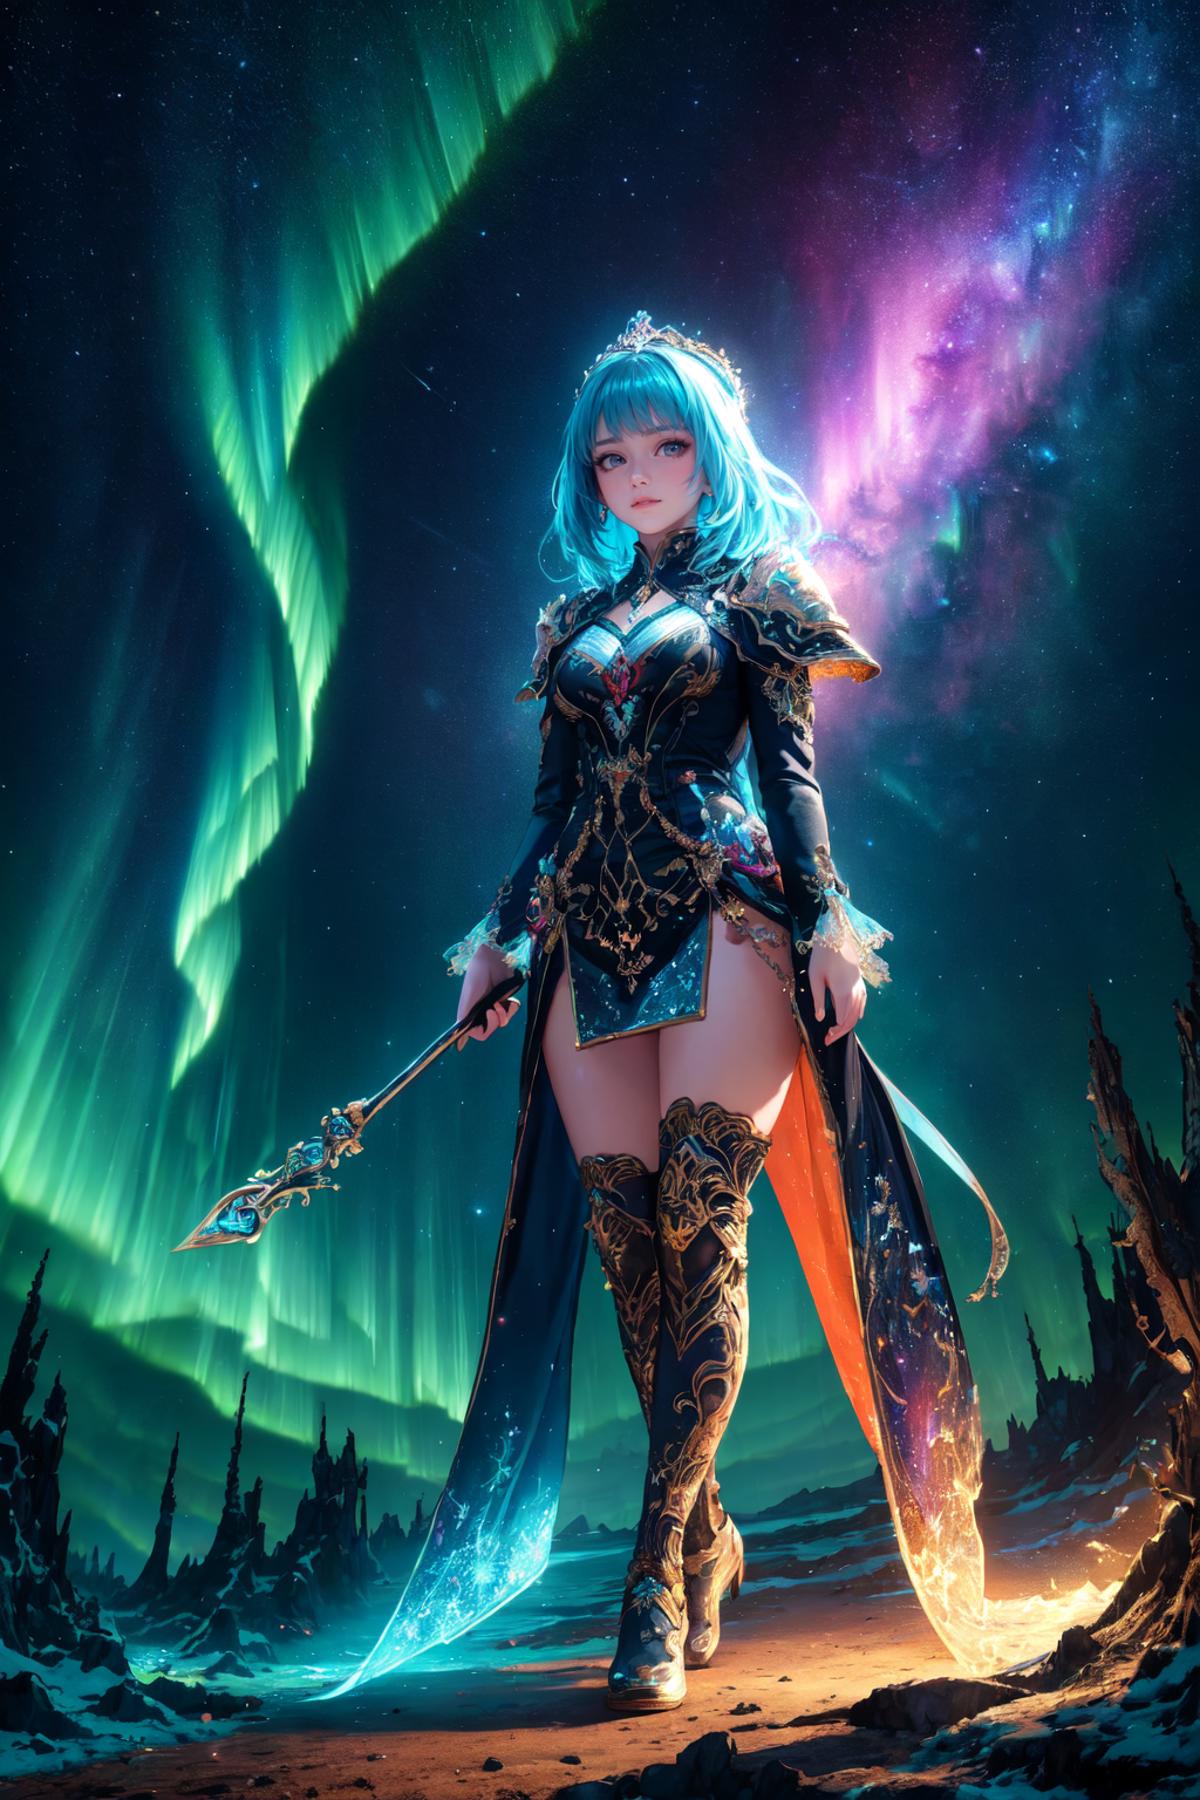 A blue-haired woman in a blue dress and boots holds a staff in a fantasy setting.